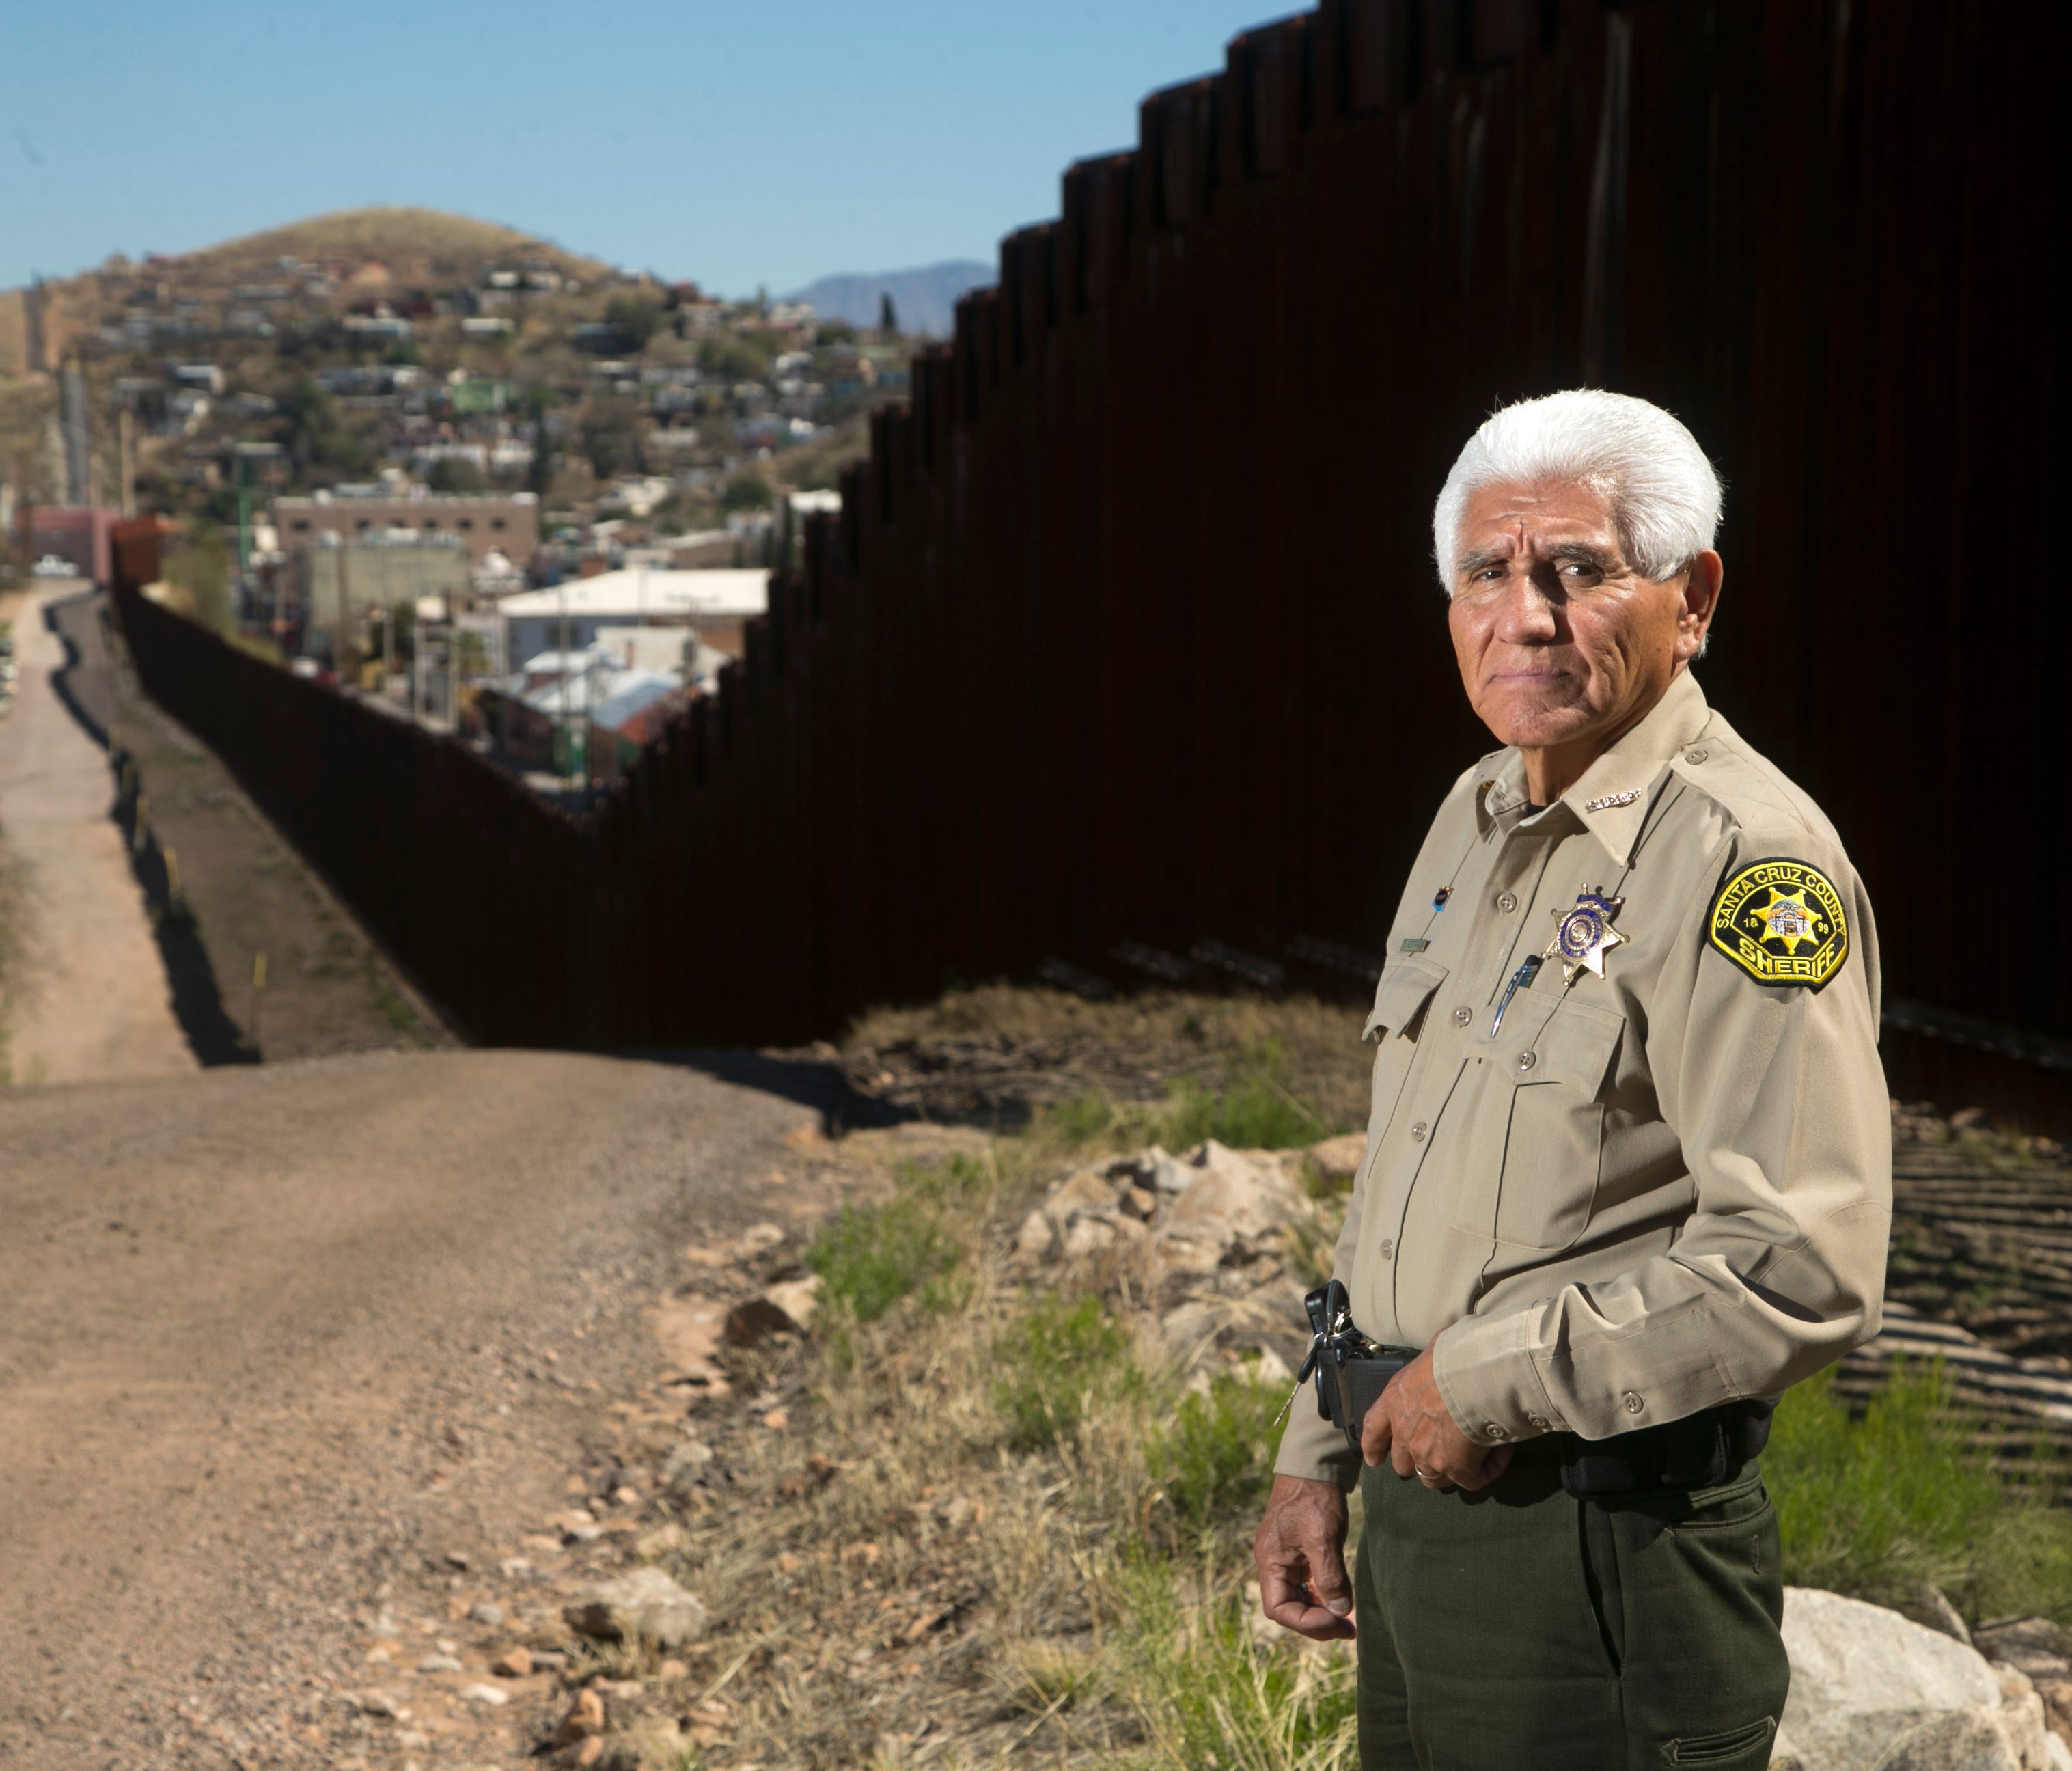 Santa Cruz County Sheriff Tony Estrada, 73, is seen along the border fence that separates the United States from Mexico in Nogales, Ariz., on Feb. 24, 2017. Estrada has been the Santa Cruz County Sheriff since 1993 and is an outspoken critic of Presi